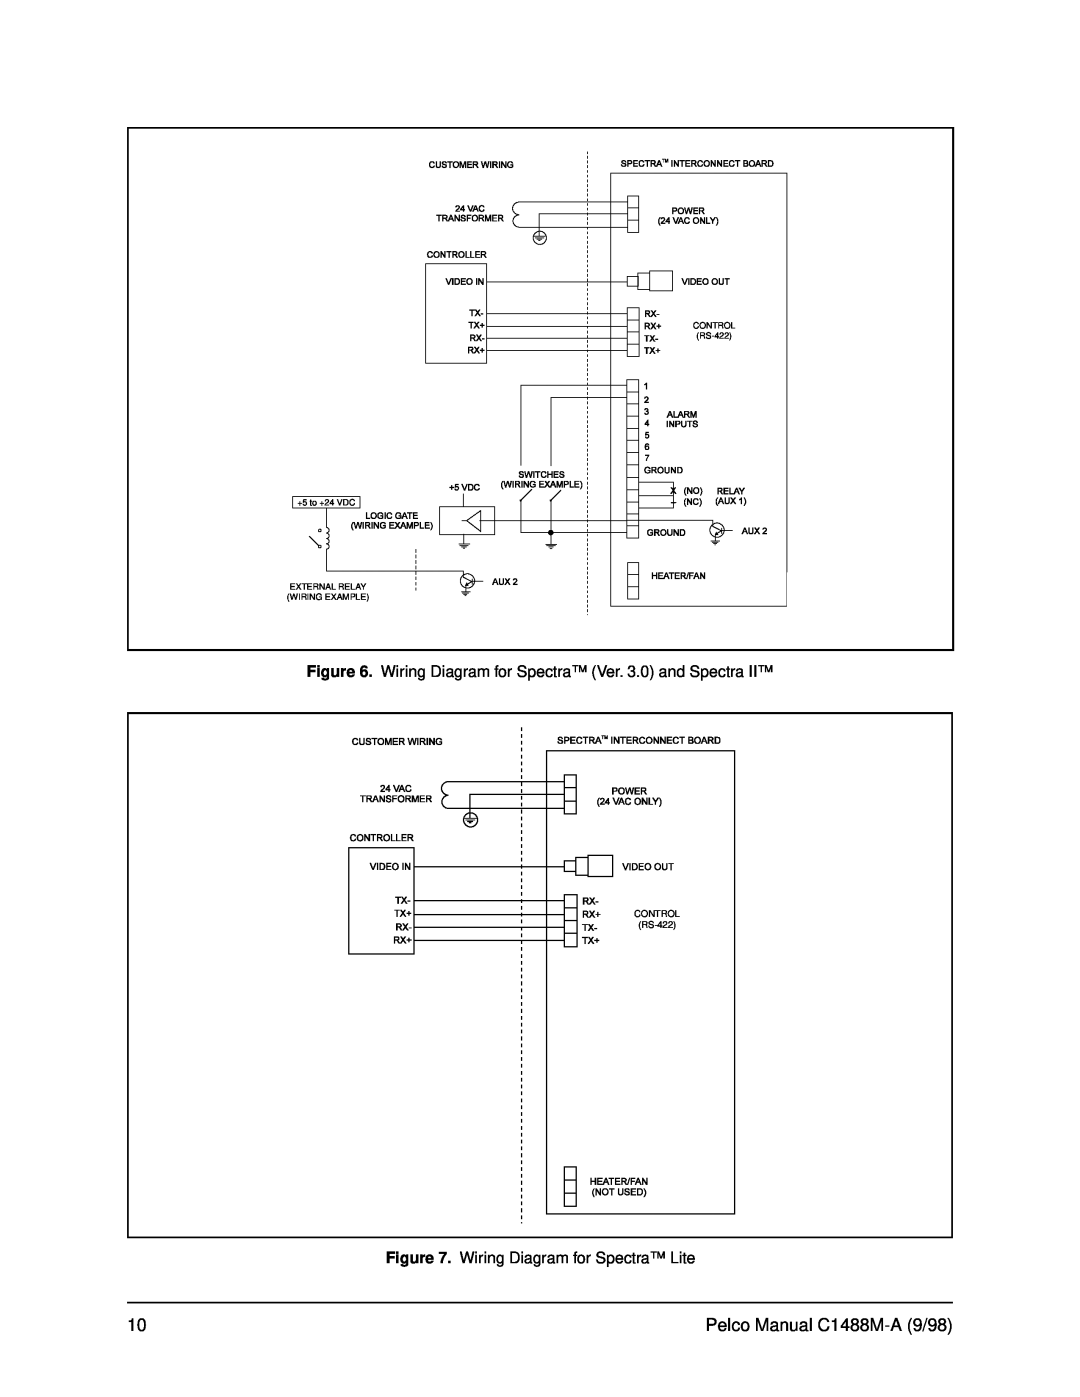 Pelco BB5L Wiring Diagram for Spectra Ver. 3.0 and Spectra, Wiring Diagram for Spectra Lite, CONTROL RS-422 